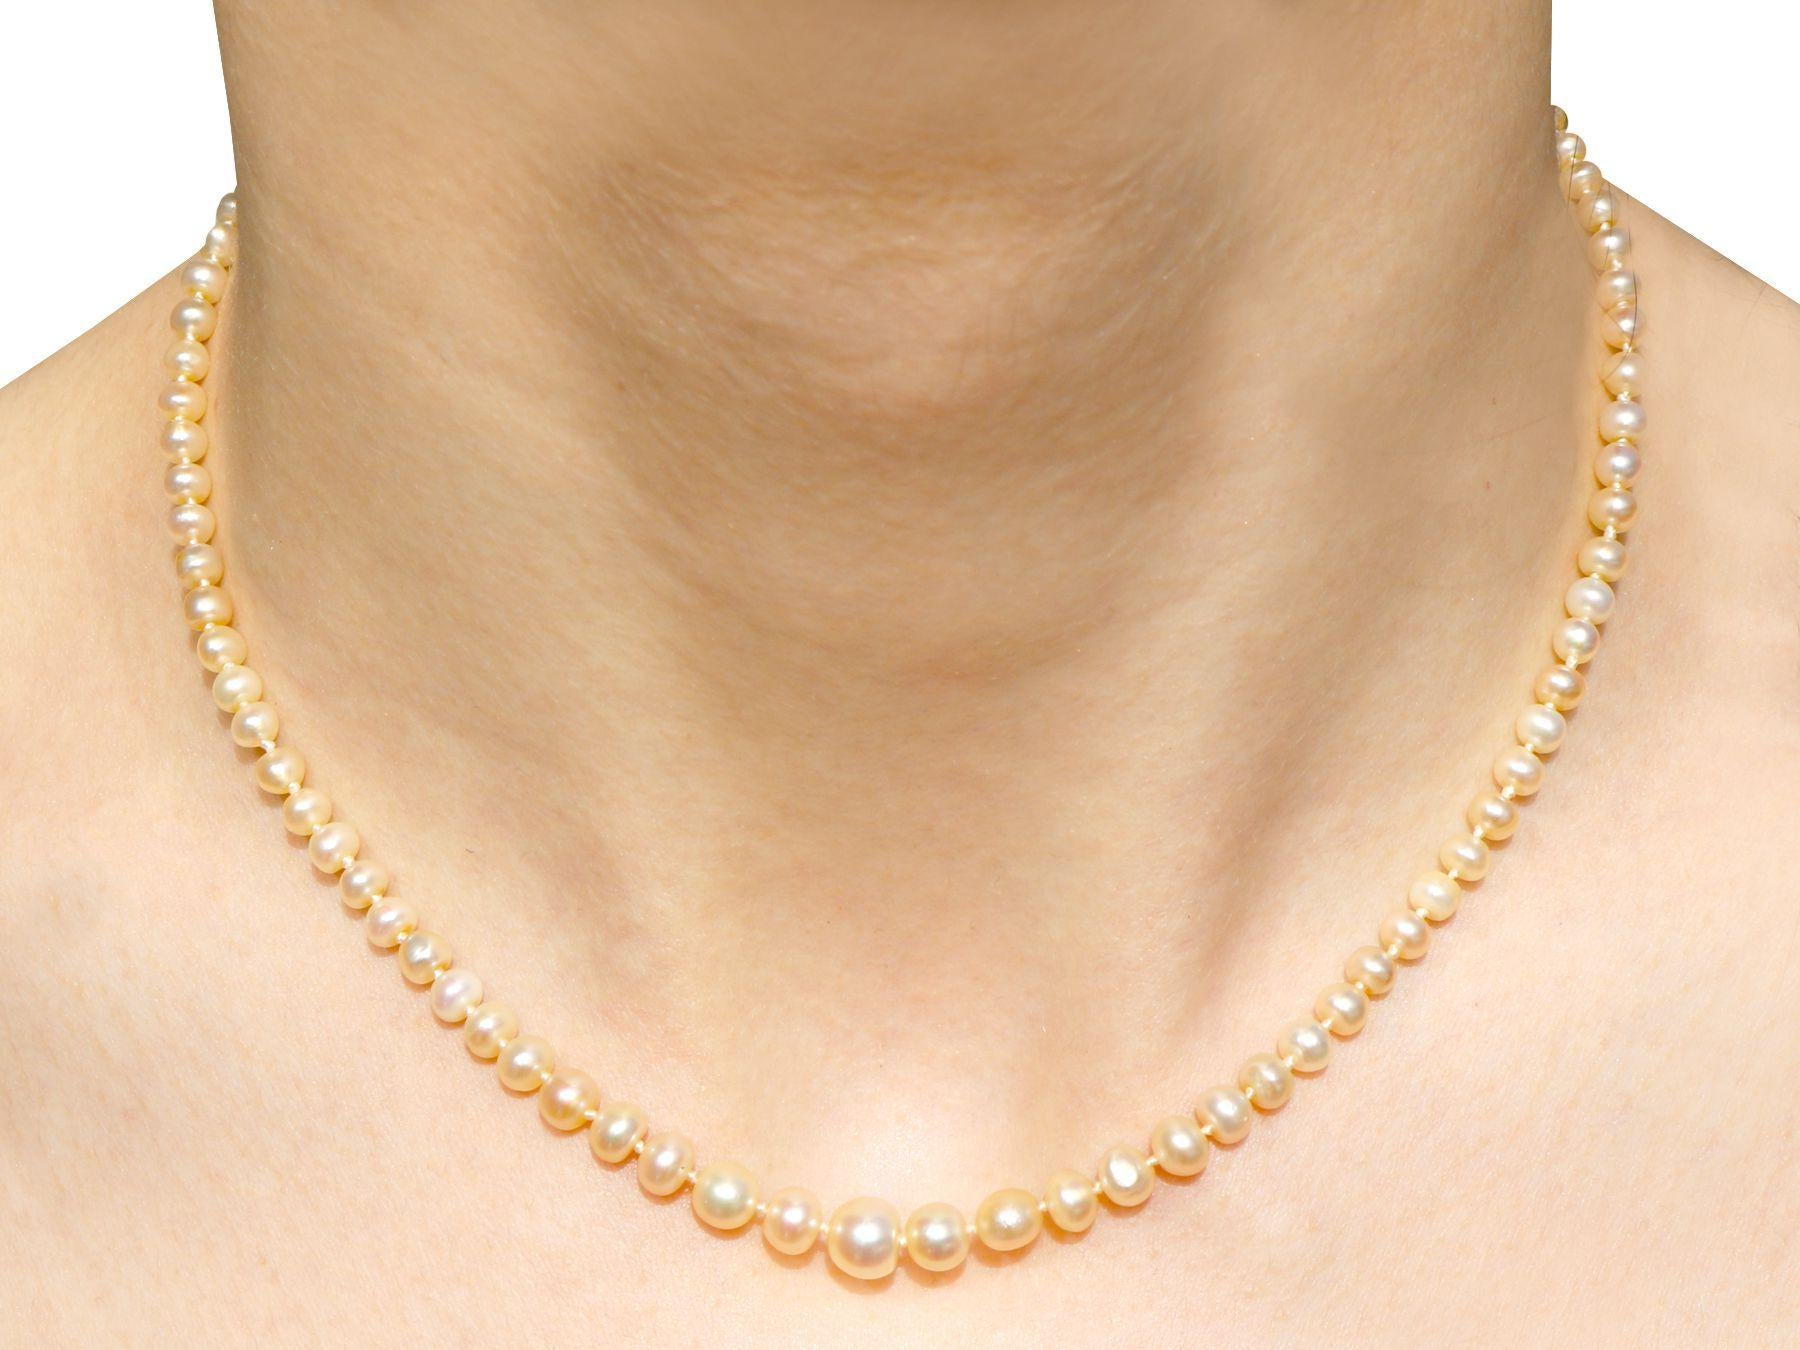 Oval Cut Antique Single Strand Natural Pearl Necklace with 1.02 Carat Diamond Set Clasp